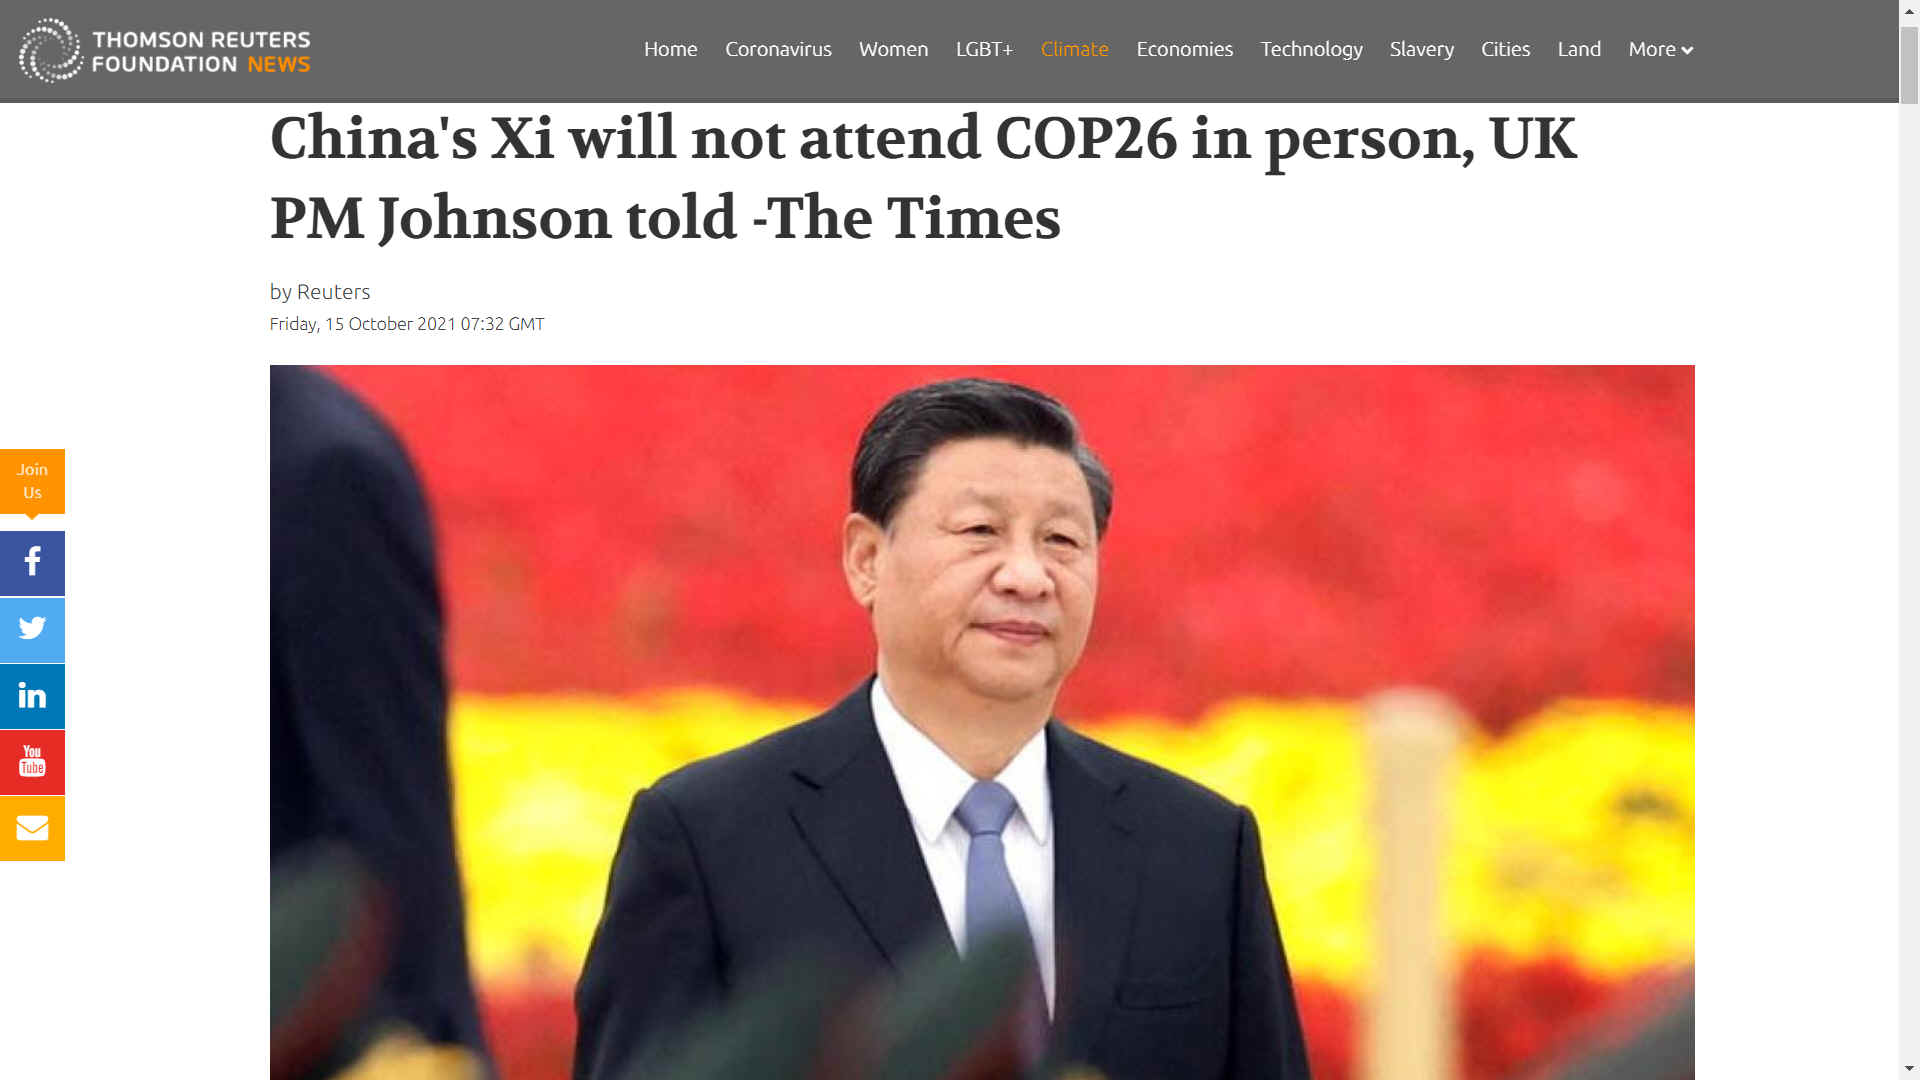 Xi Jinping loves dirty black coal and carbon dioxide